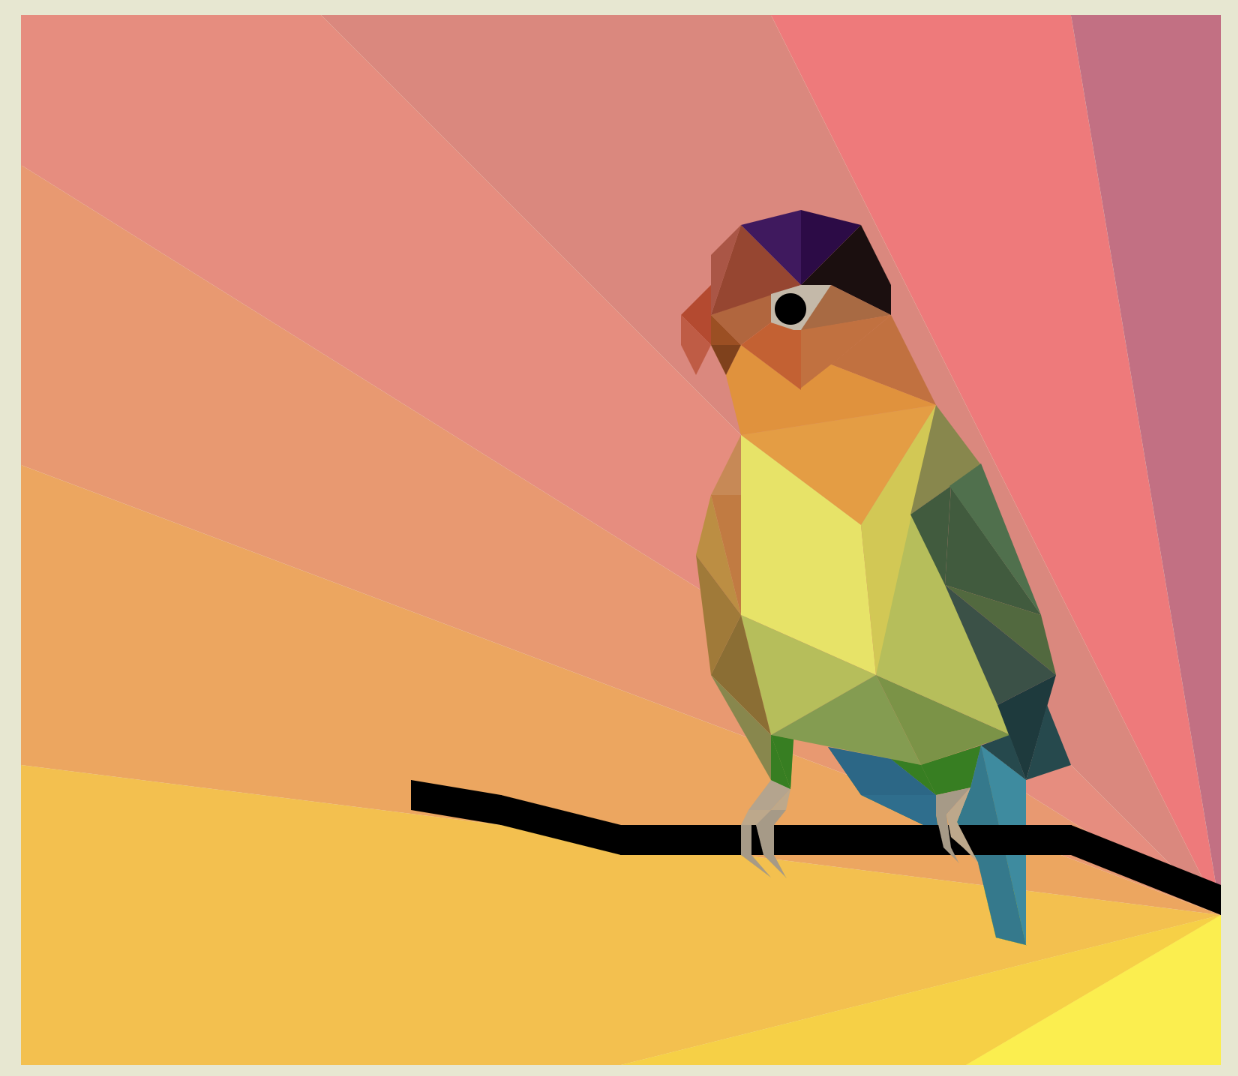 Rainbow-colored bird with a green back and tail, yellow stomach, orange neck, and red head sitting on a branch with a pink and orange sunset in the background.